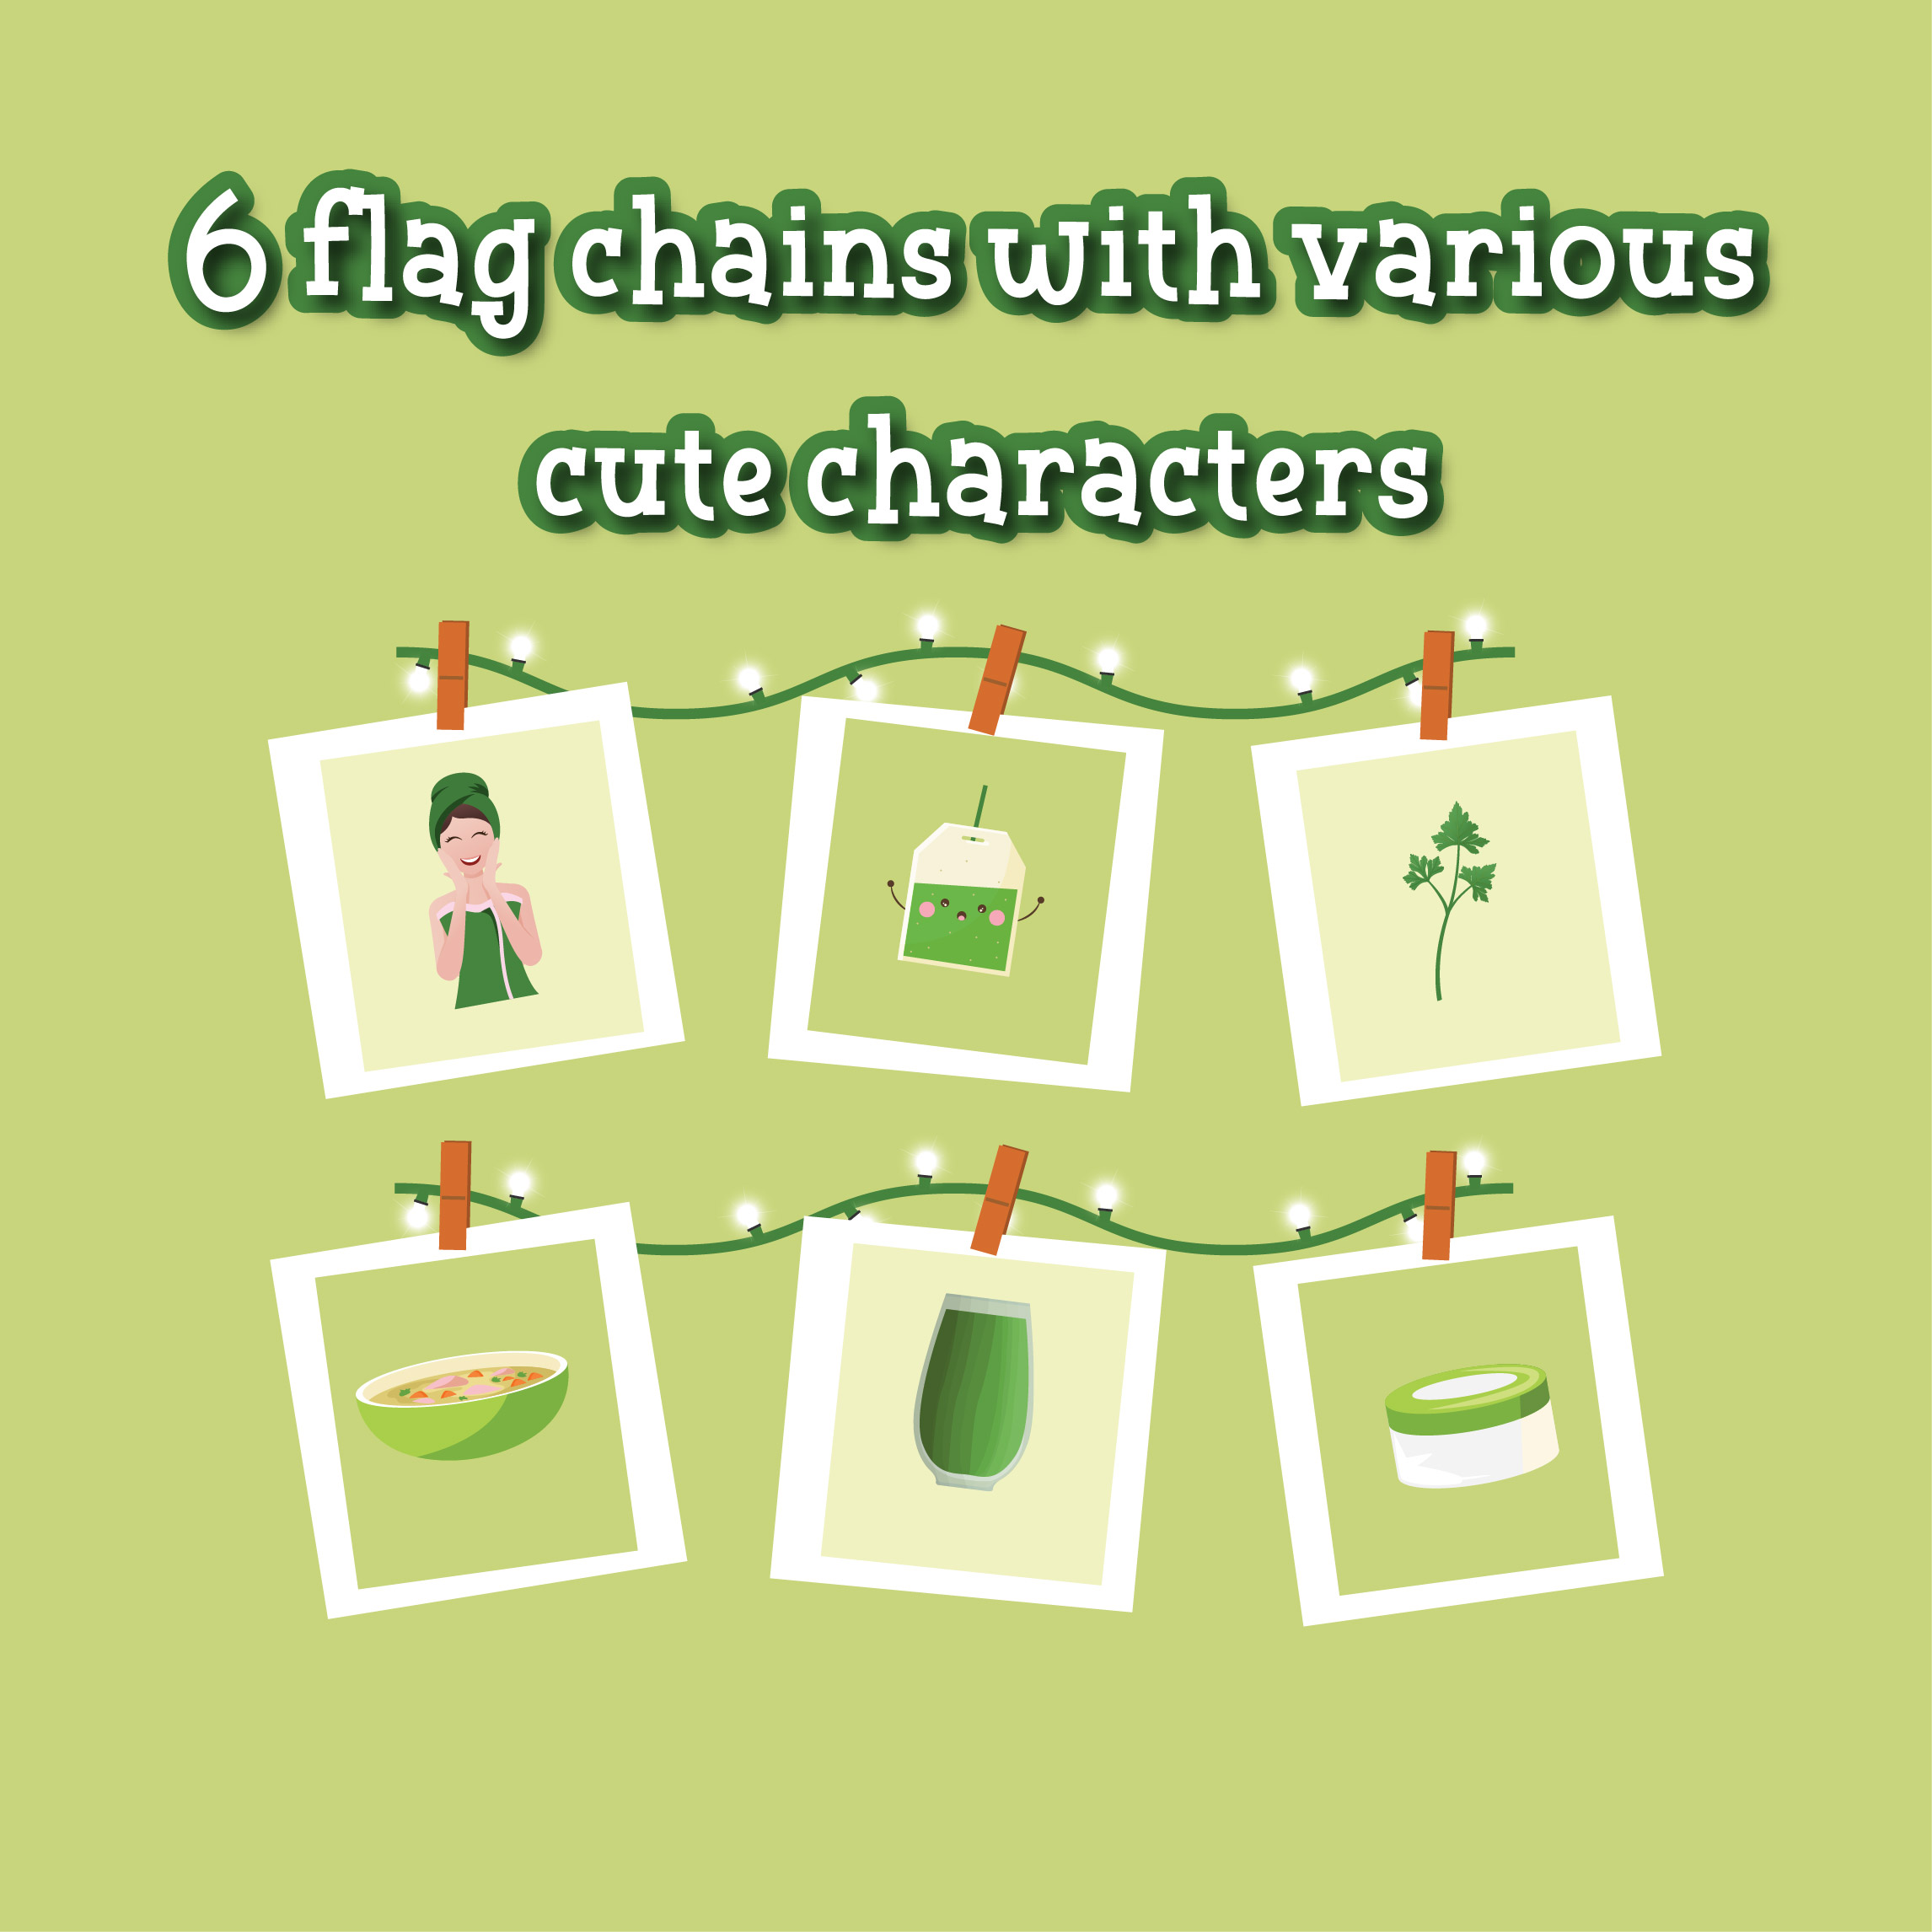 6 chains of flags with various cute characters